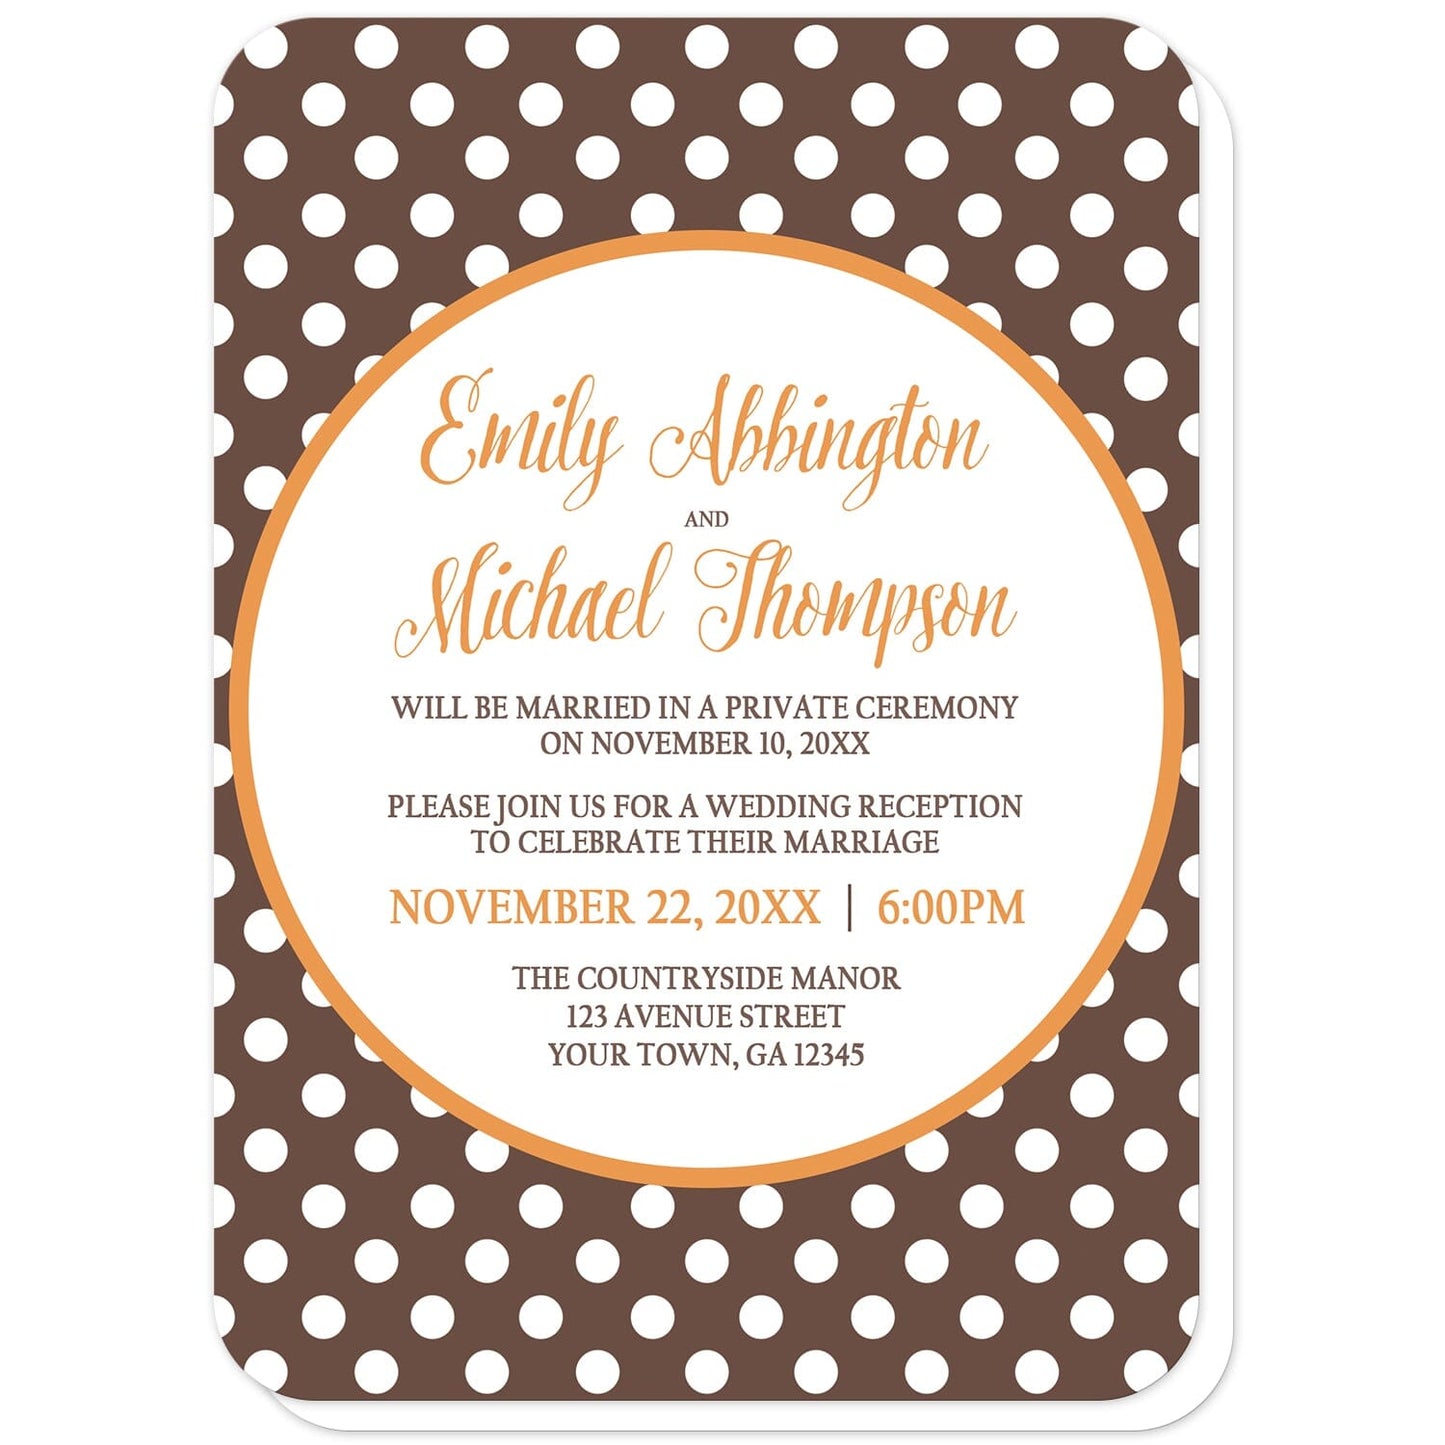 Orange Brown Polka Dot Reception Only Invitations (with rounded corners) at Artistically Invited. Autumn-inspired orange brown polka dot reception only invitations with your post-wedding reception details custom printed in orange and brown inside a white circle outlined in orange, over a brown polka dot pattern. The couple's names and reception date are printed in orange while the remaining details are printed in brown.